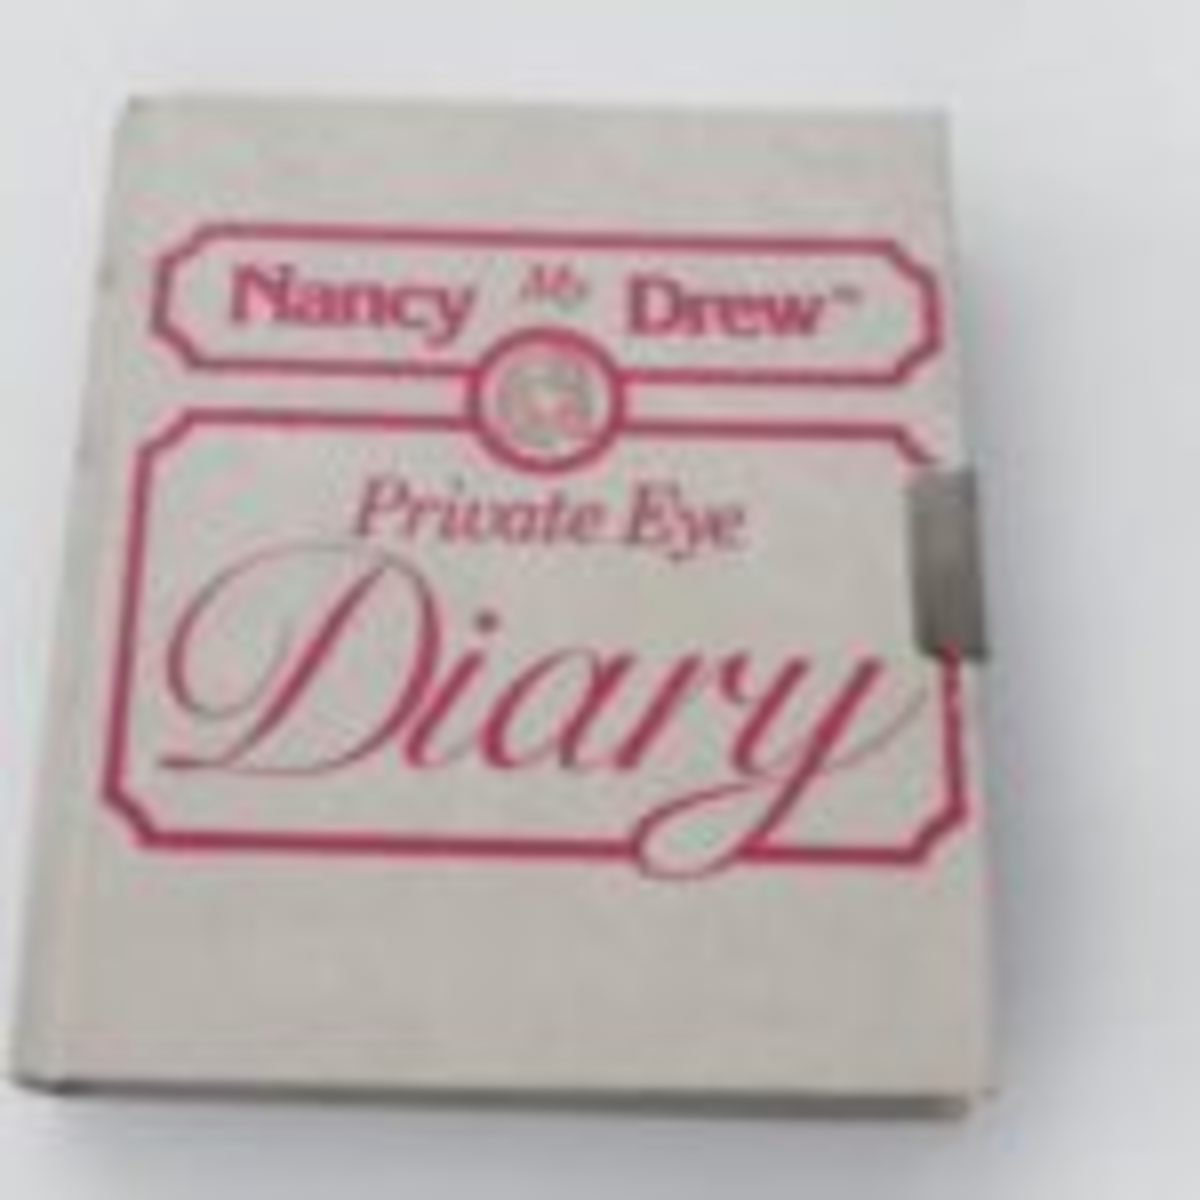 Hard to find white Nancy Drew diary - 1970s, signed by Harriet Stratemeyer Adams (Carolyn Keene at the time).